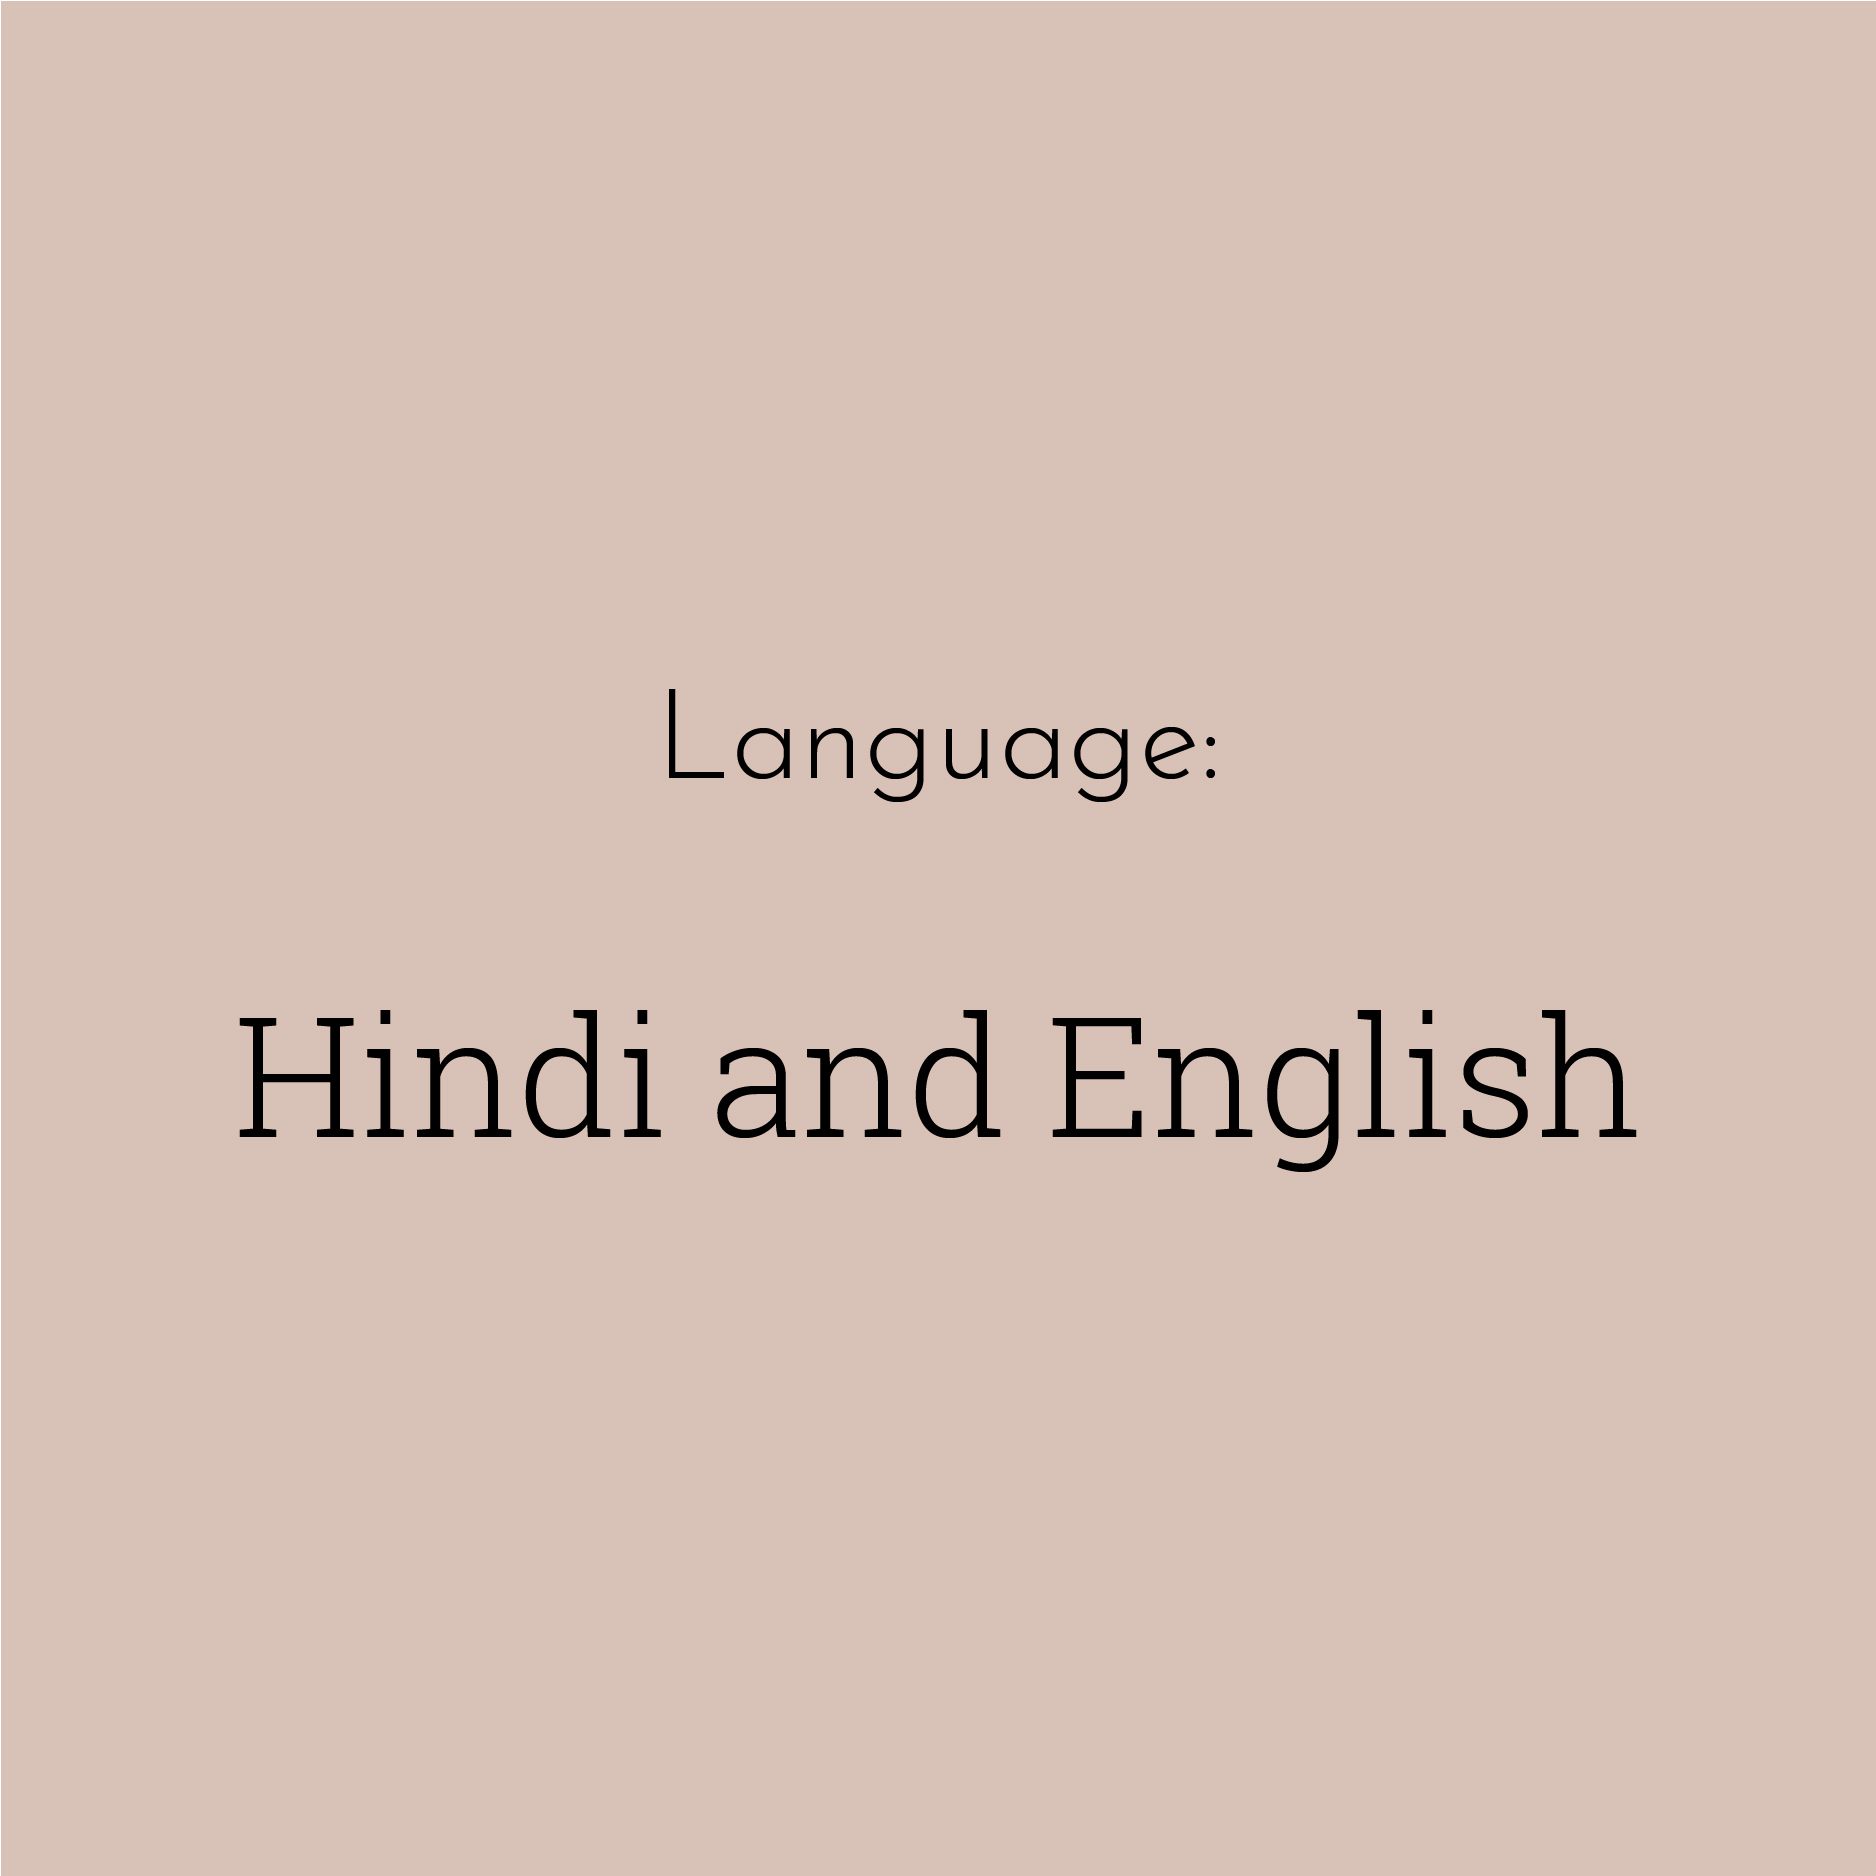 A solid brown block contains the text “Hindi and English”